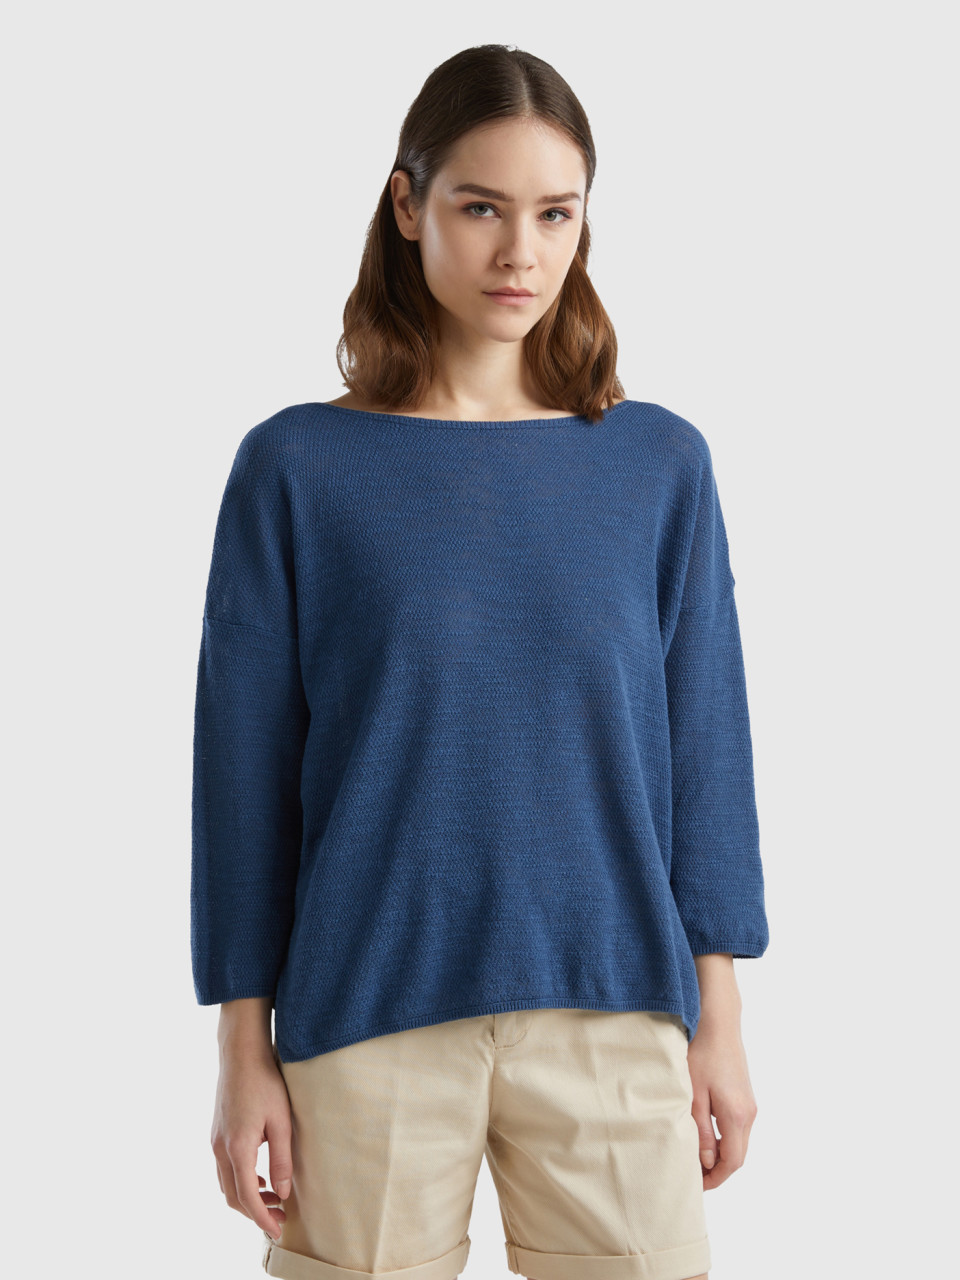 Benetton, Sweater In Linen Blend With 3/4 Sleeves, Air Force Blue, Women